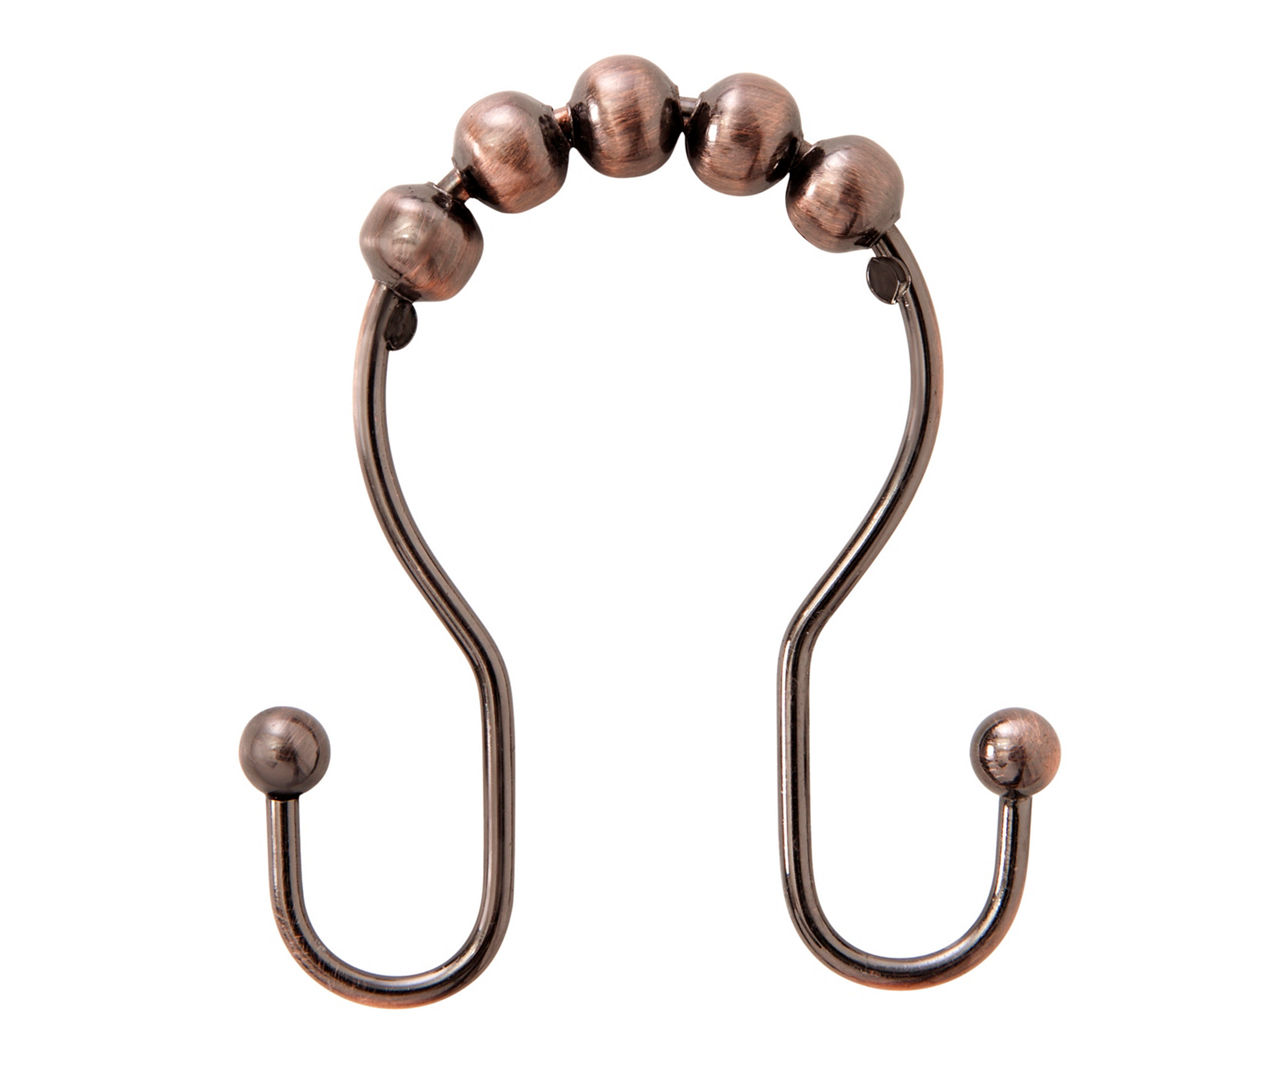 Oil-Rubbed Bronze Beaded Roller Shower Curtain Double Hooks, 12-Pack